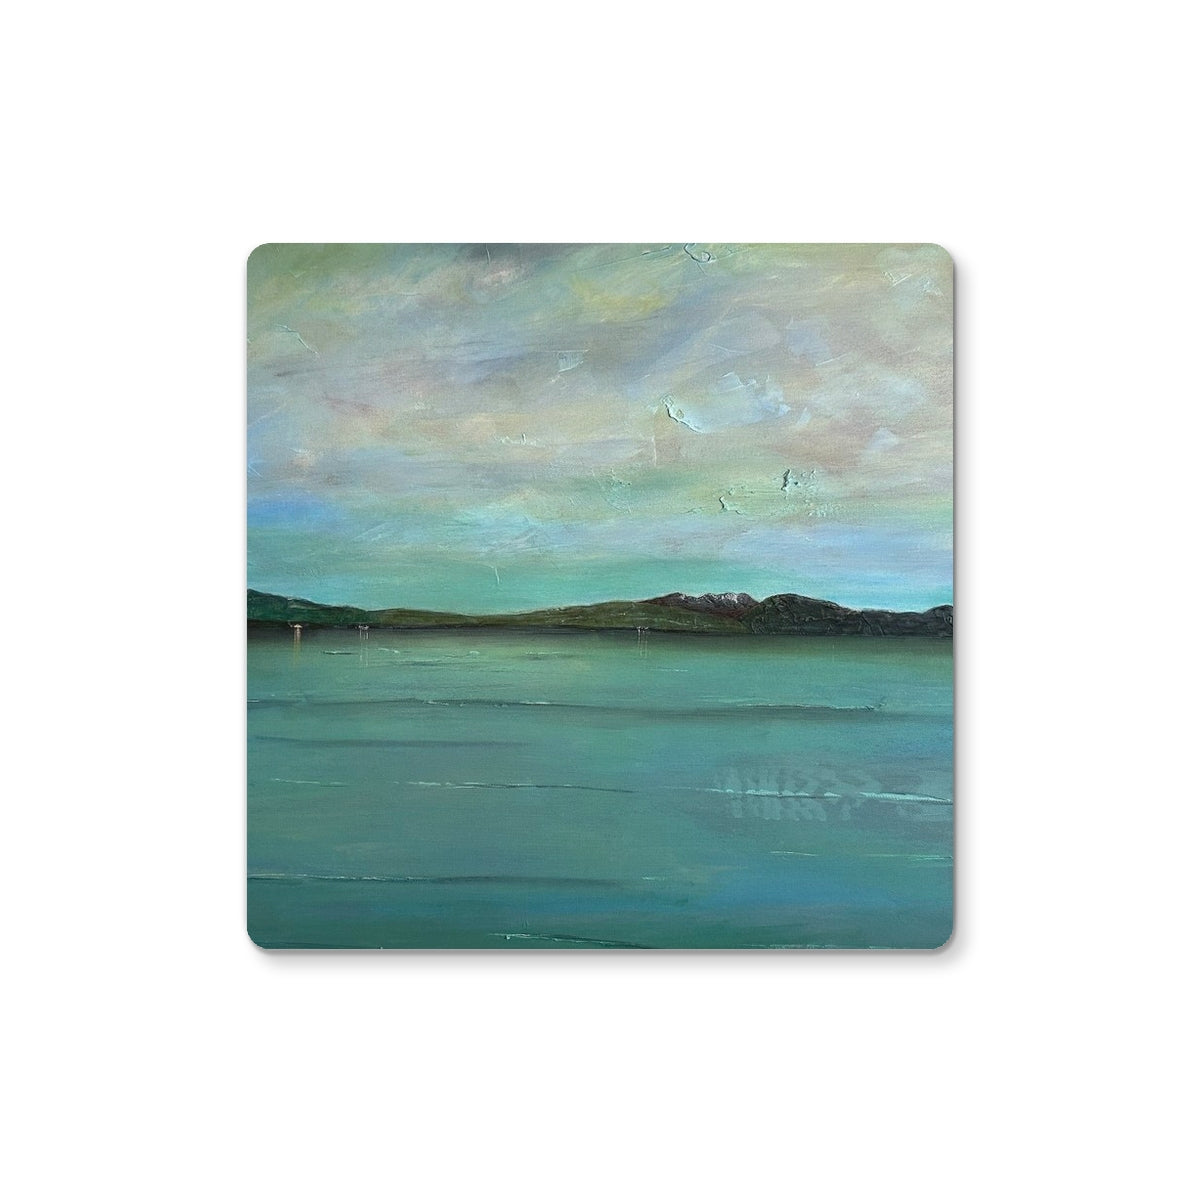 An Ethereal Loch Lomond Art Gifts Coaster